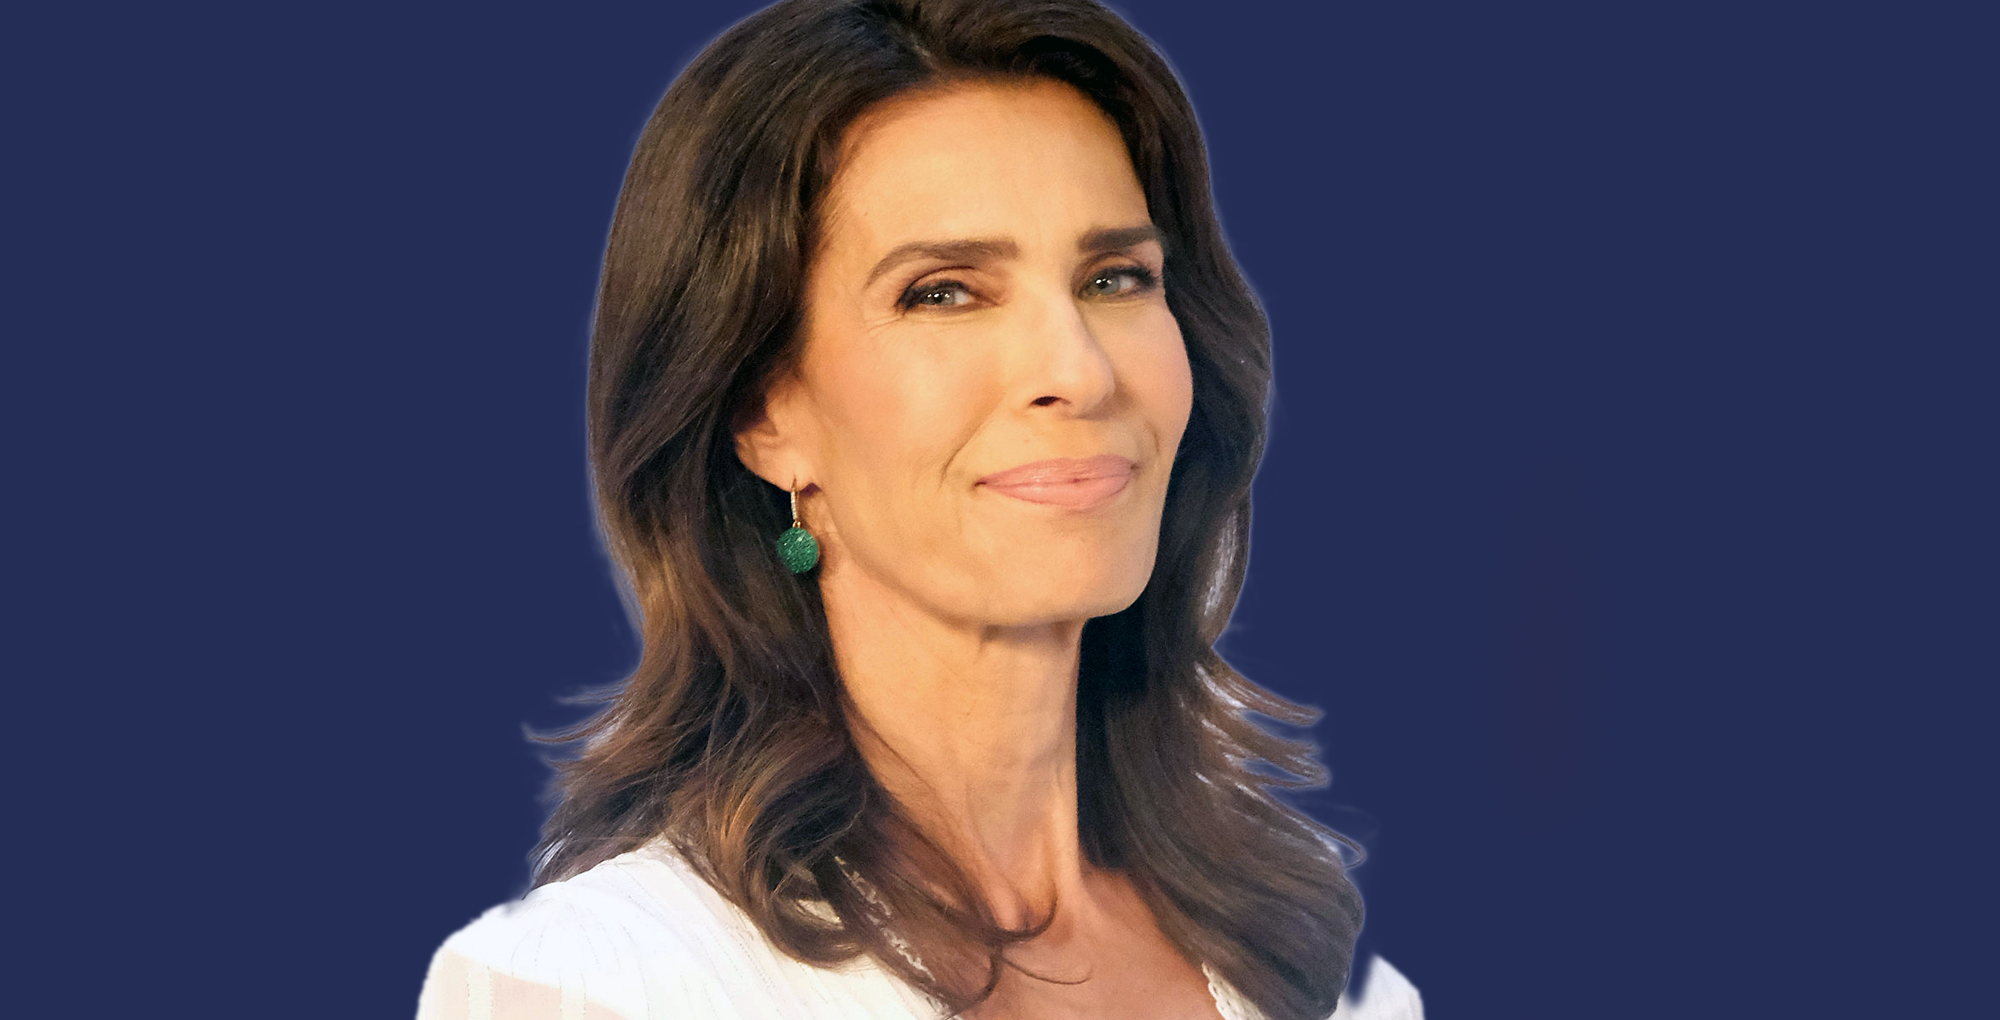 kristian alfonso played hope brady on days of our lives.